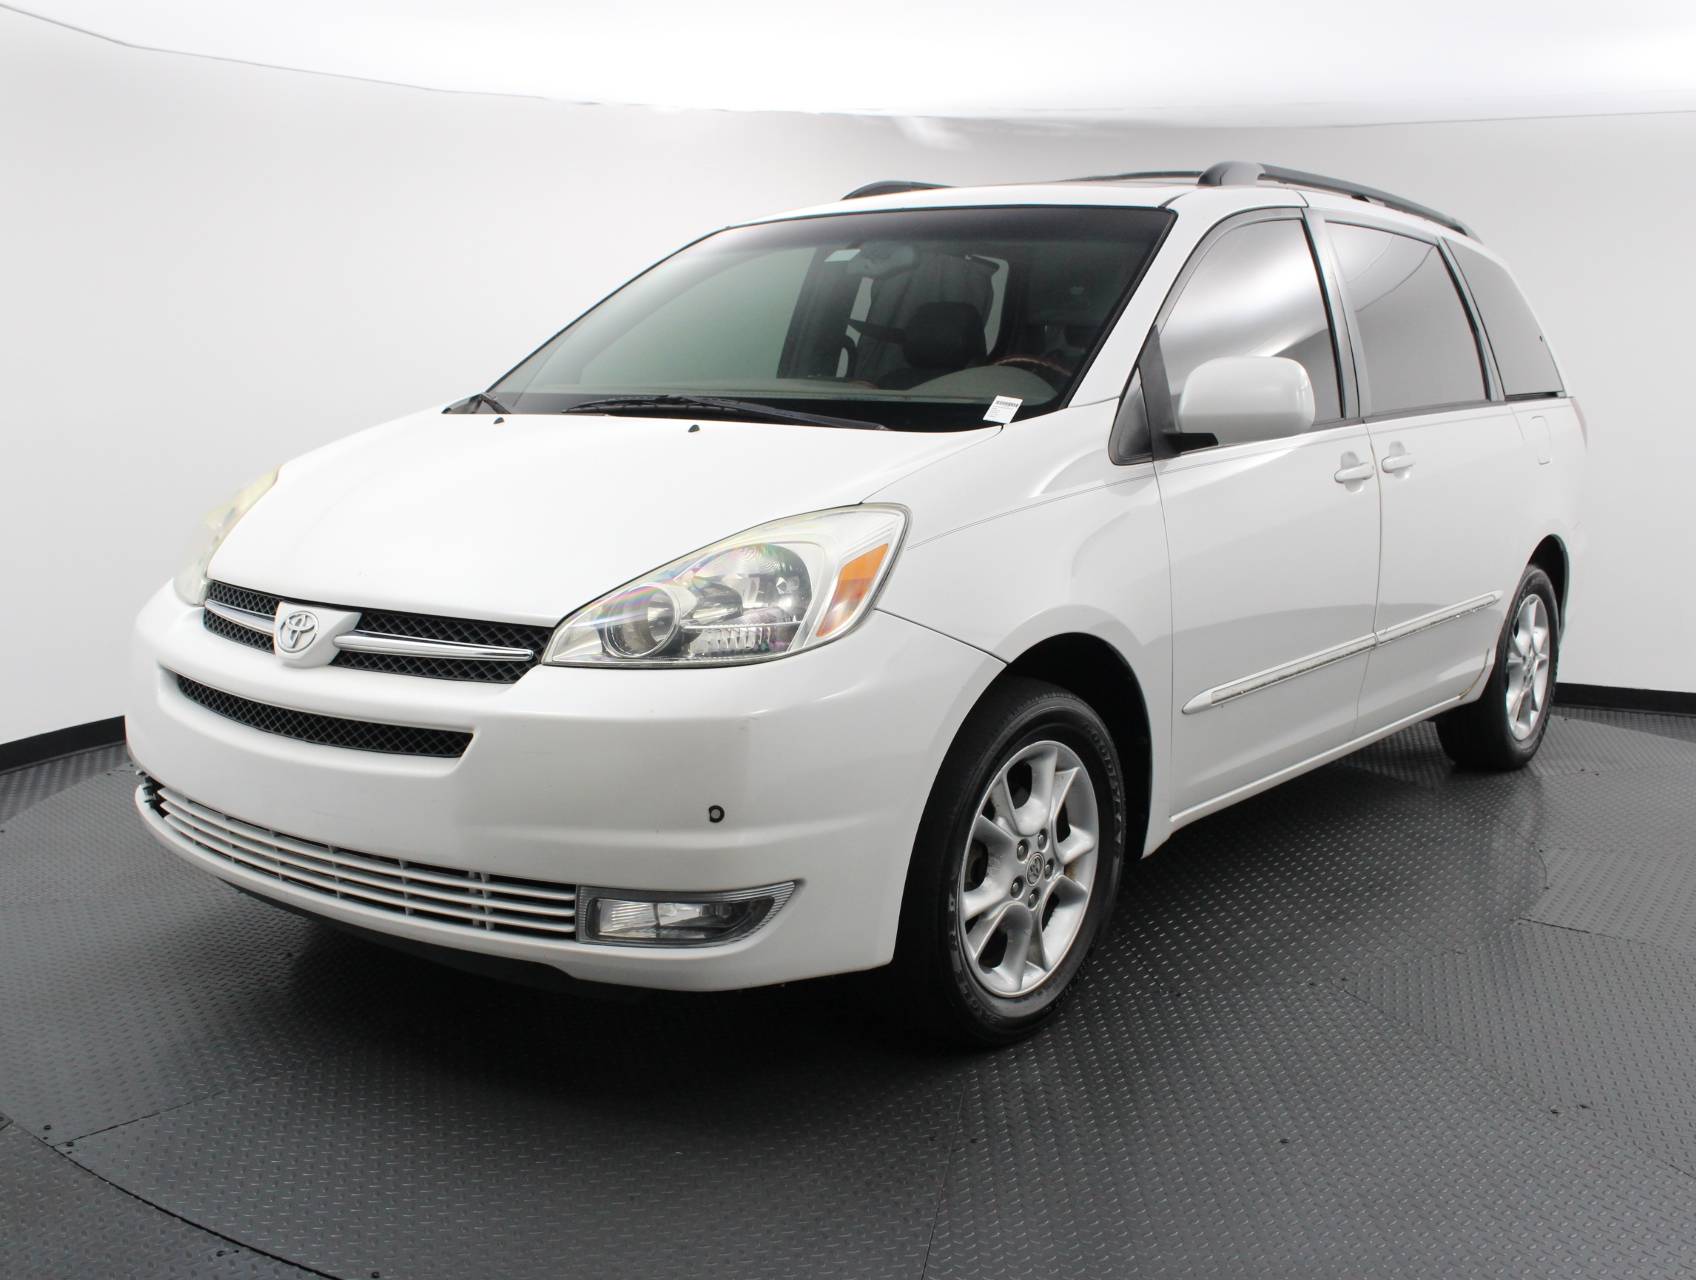 Used 2005 TOYOTA SIENNA XLE LTD for sale in WEST PALM | 121160